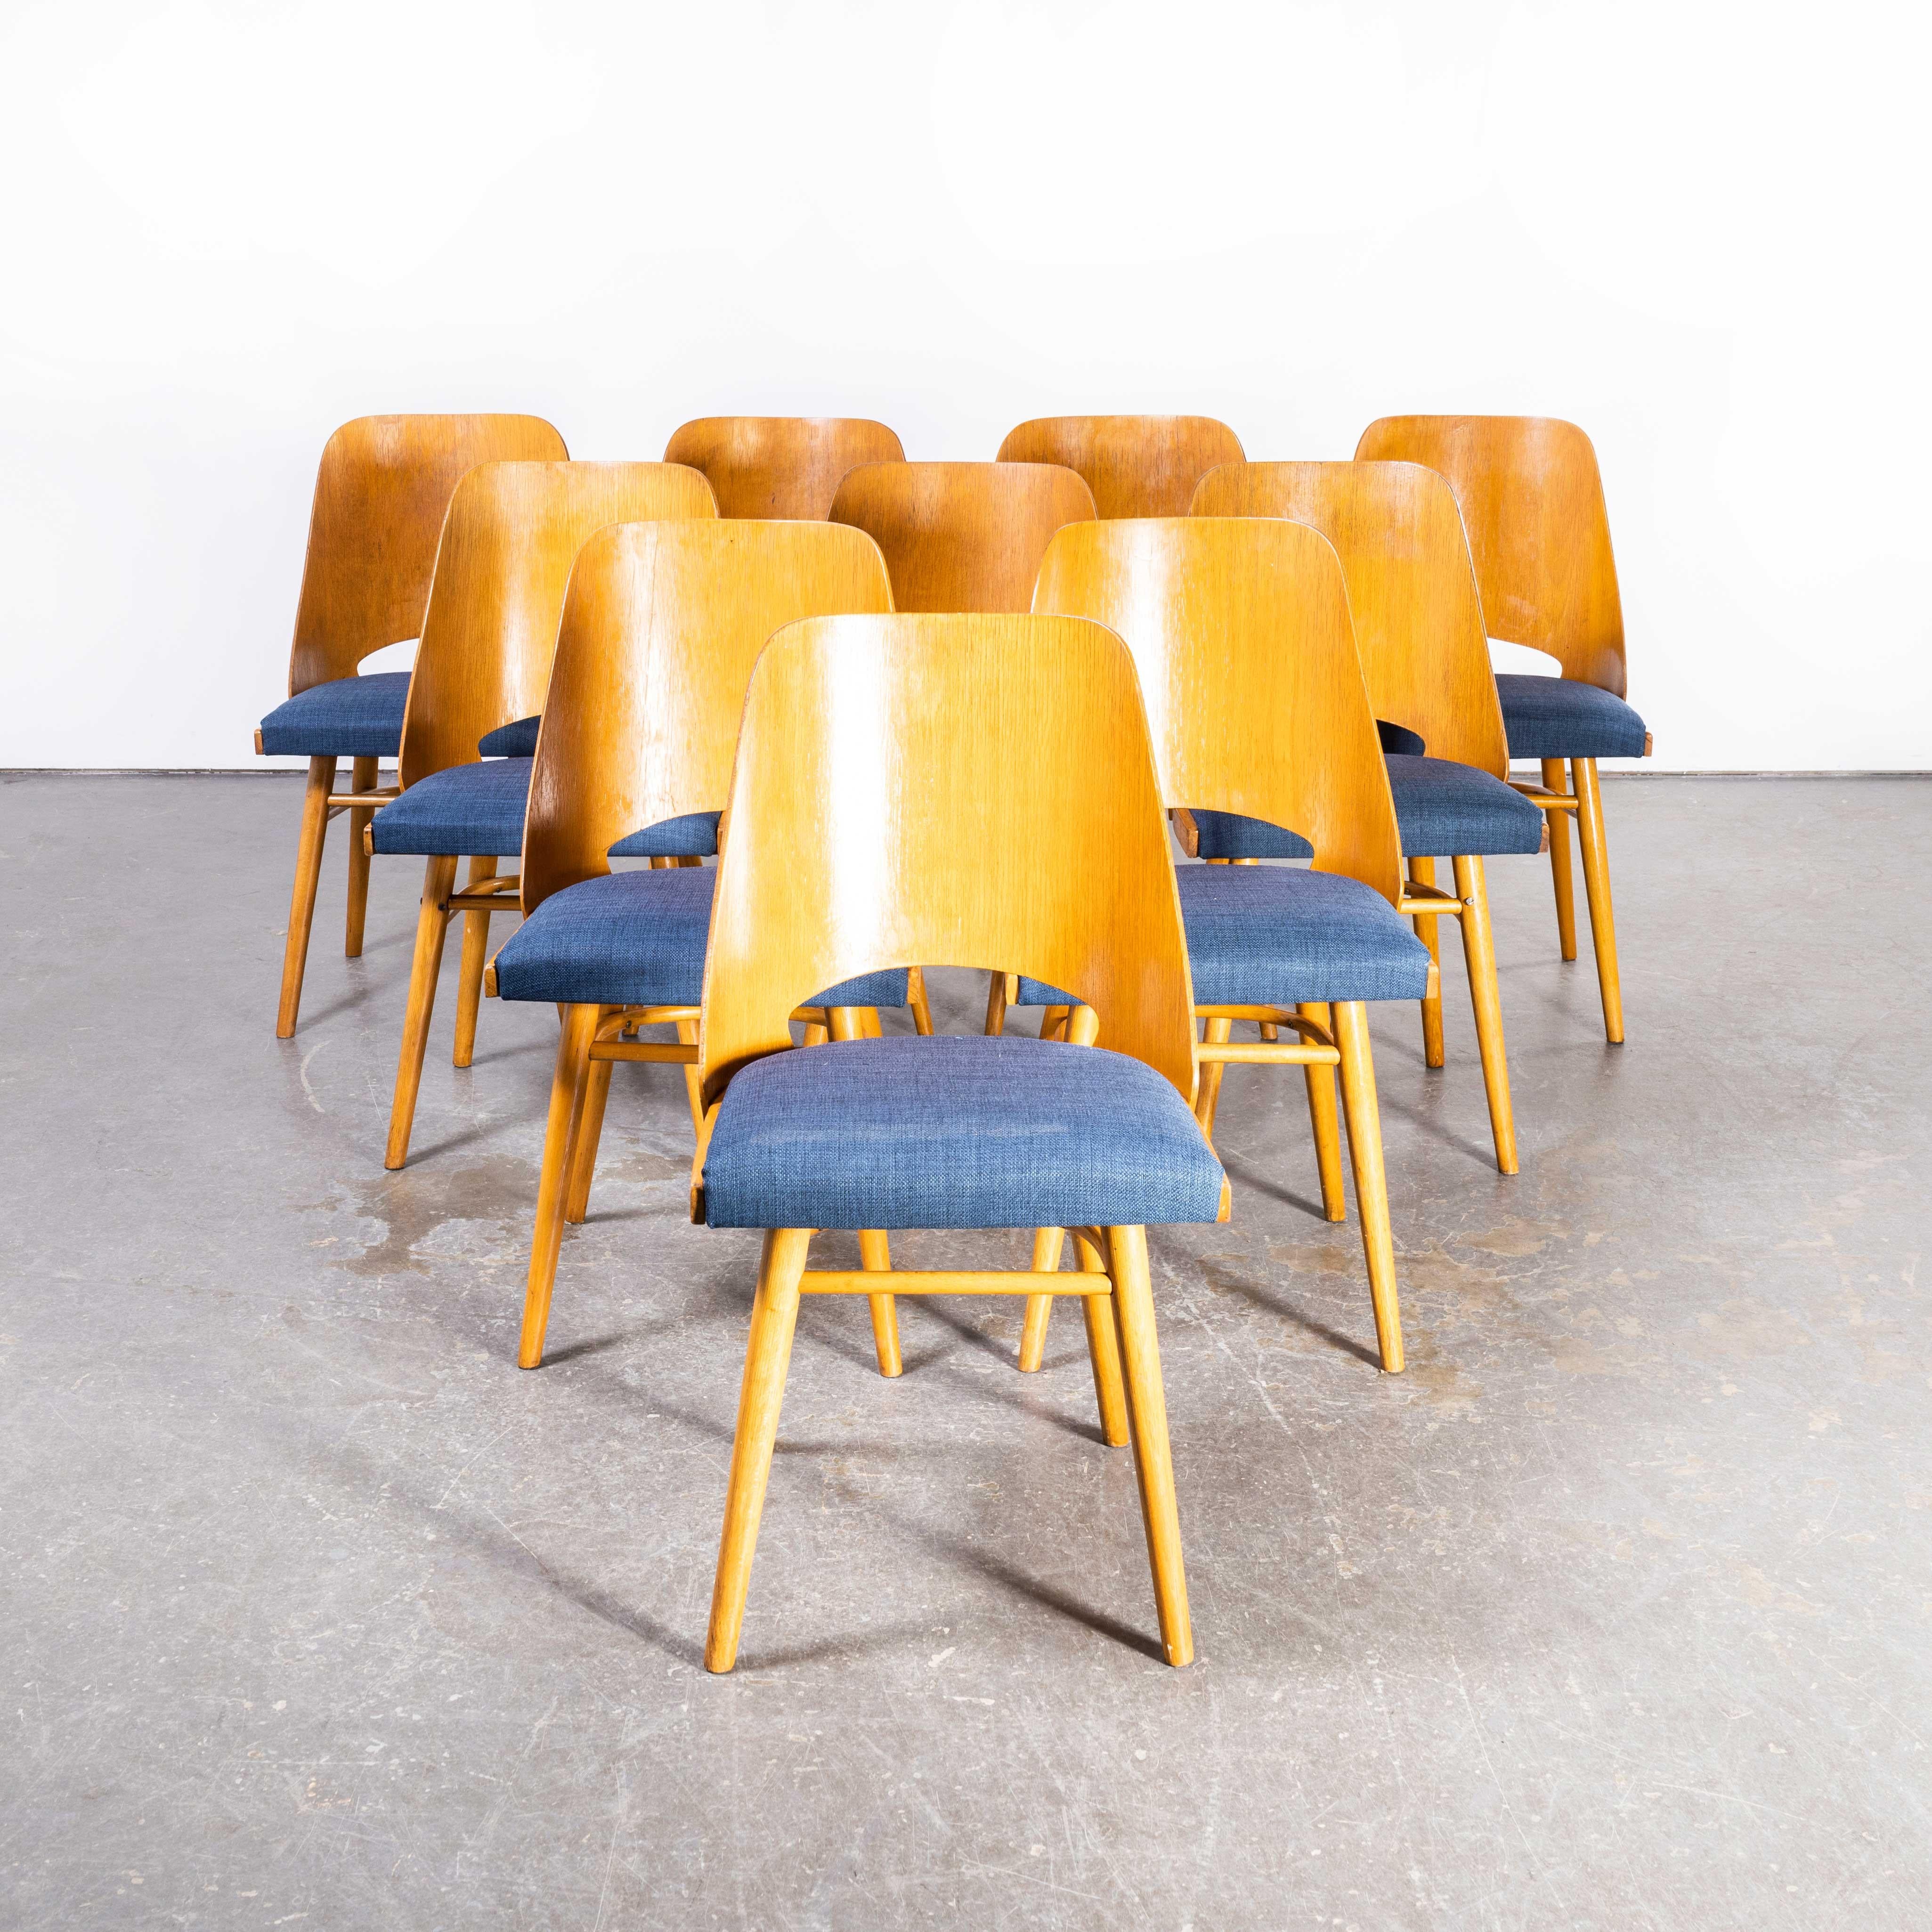 1950's Re -Upholstered Thon Light Oak Chairs By Radomir Hoffman - Set Of Ten In Good Condition For Sale In Hook, Hampshire